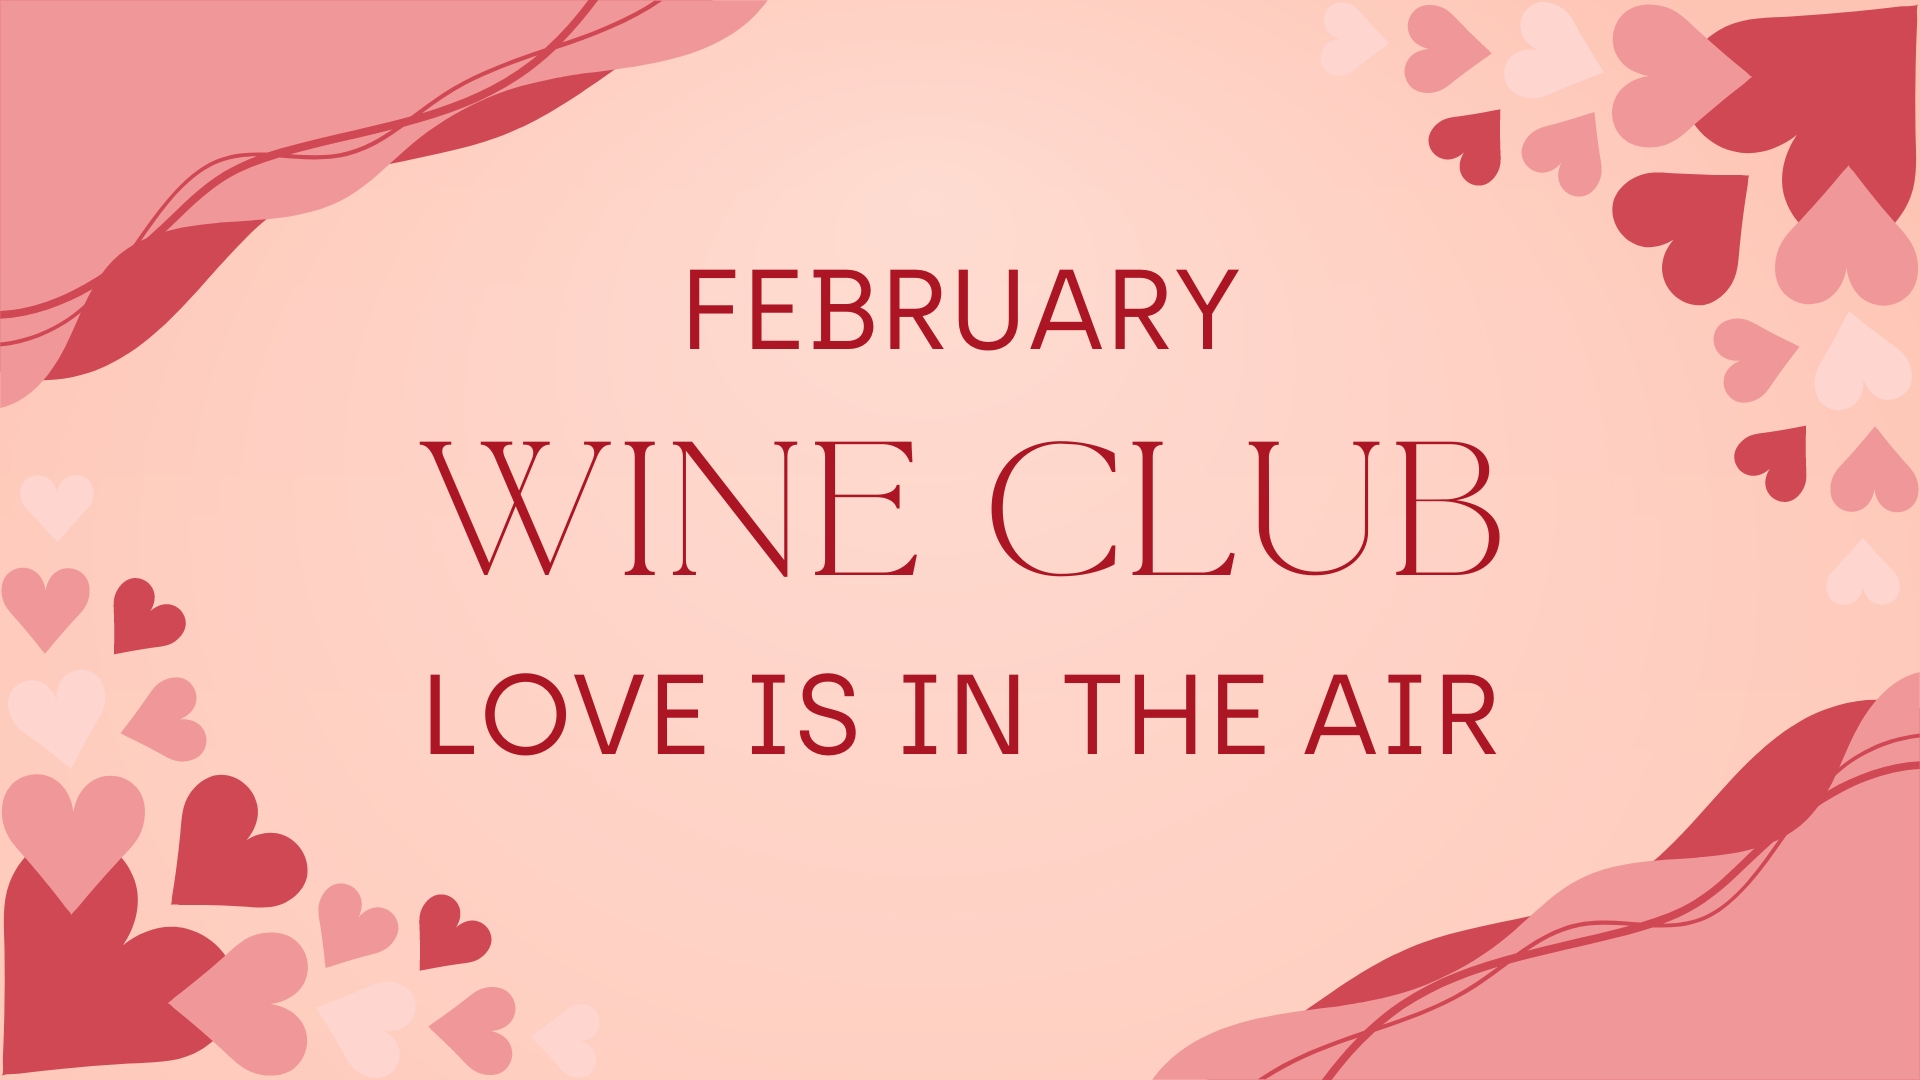 February Wine Club Pick-up Party – Love is in the Air